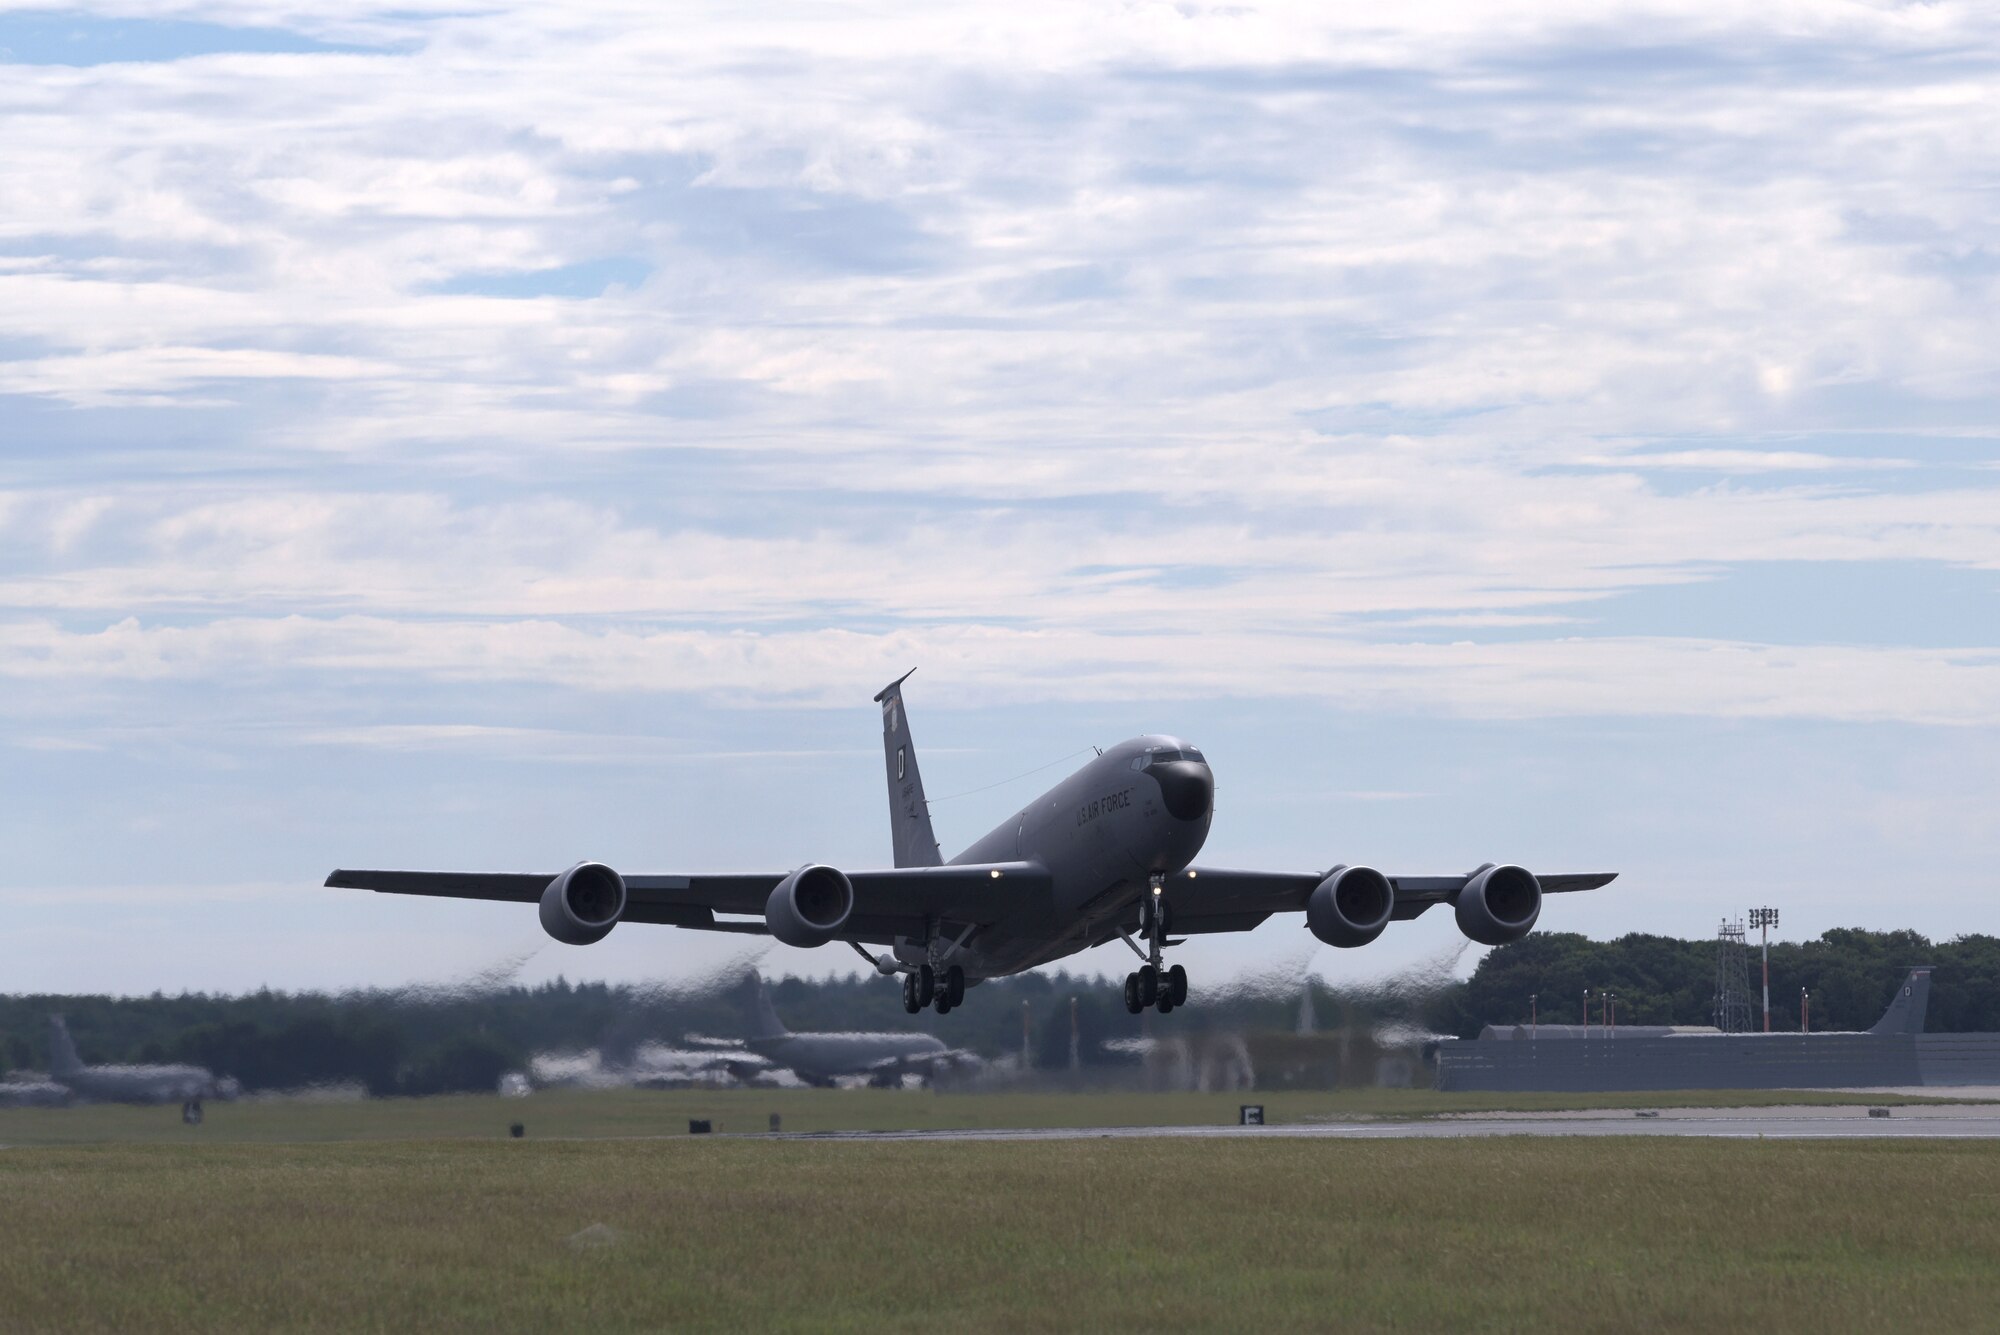 A U.S. Air Force KC-135 Stratotanker, assigned to the 100th Air Refueling Wing, takes off at RAF Mildenahall, July 23, 2020. The 100th ARW is the only permanent U.S. air refueling wing in the European theater, providing the critical air refueling "bridge" which allows the Expeditionary Air Force to deploy around the globe at a moment's notice. (U.S. Air Force photo by Senior Airman Benjamin Cooper)